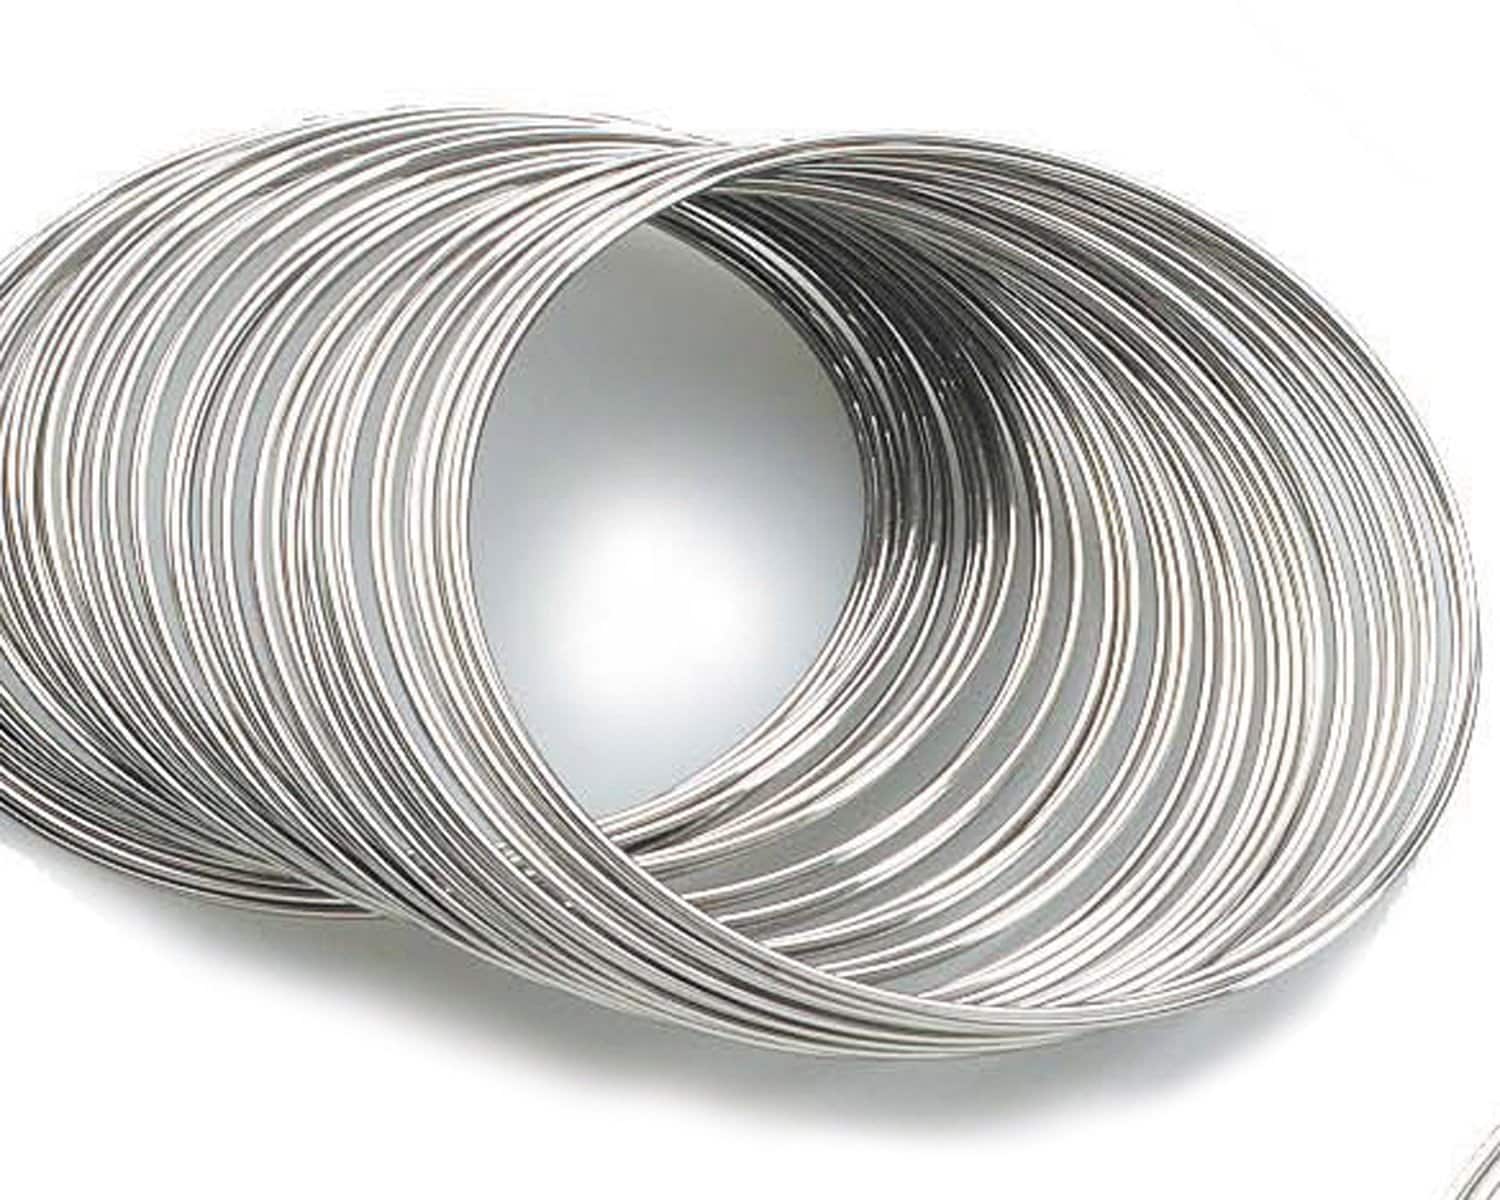 60 COILS 55mm x 0.6mm Memory Wire Platinum Colours Silver Silver Gold